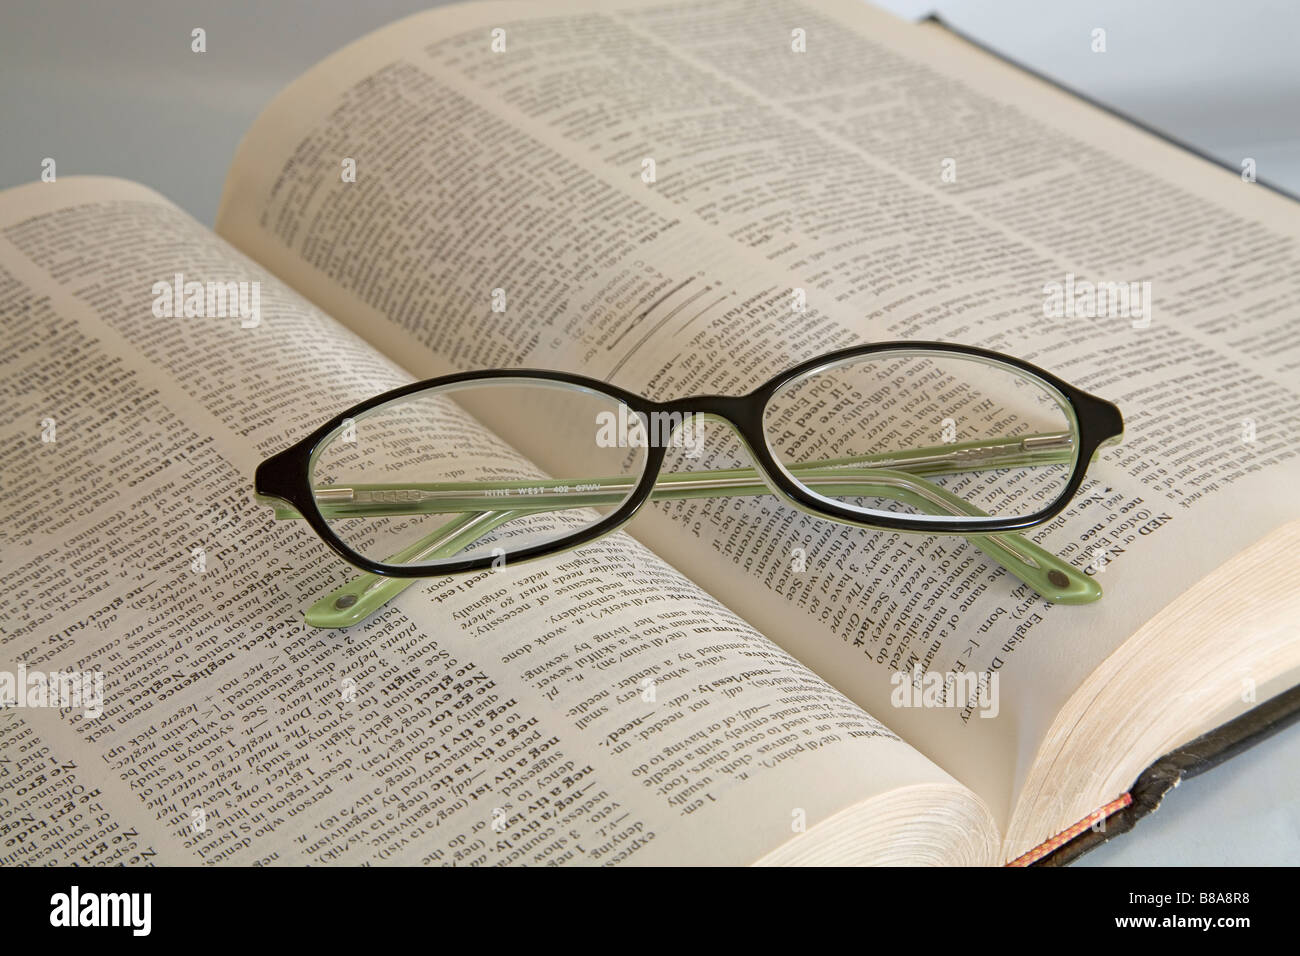 A pair of common reading eye glasses or spectacles lying on an open dictionary Stock Photo